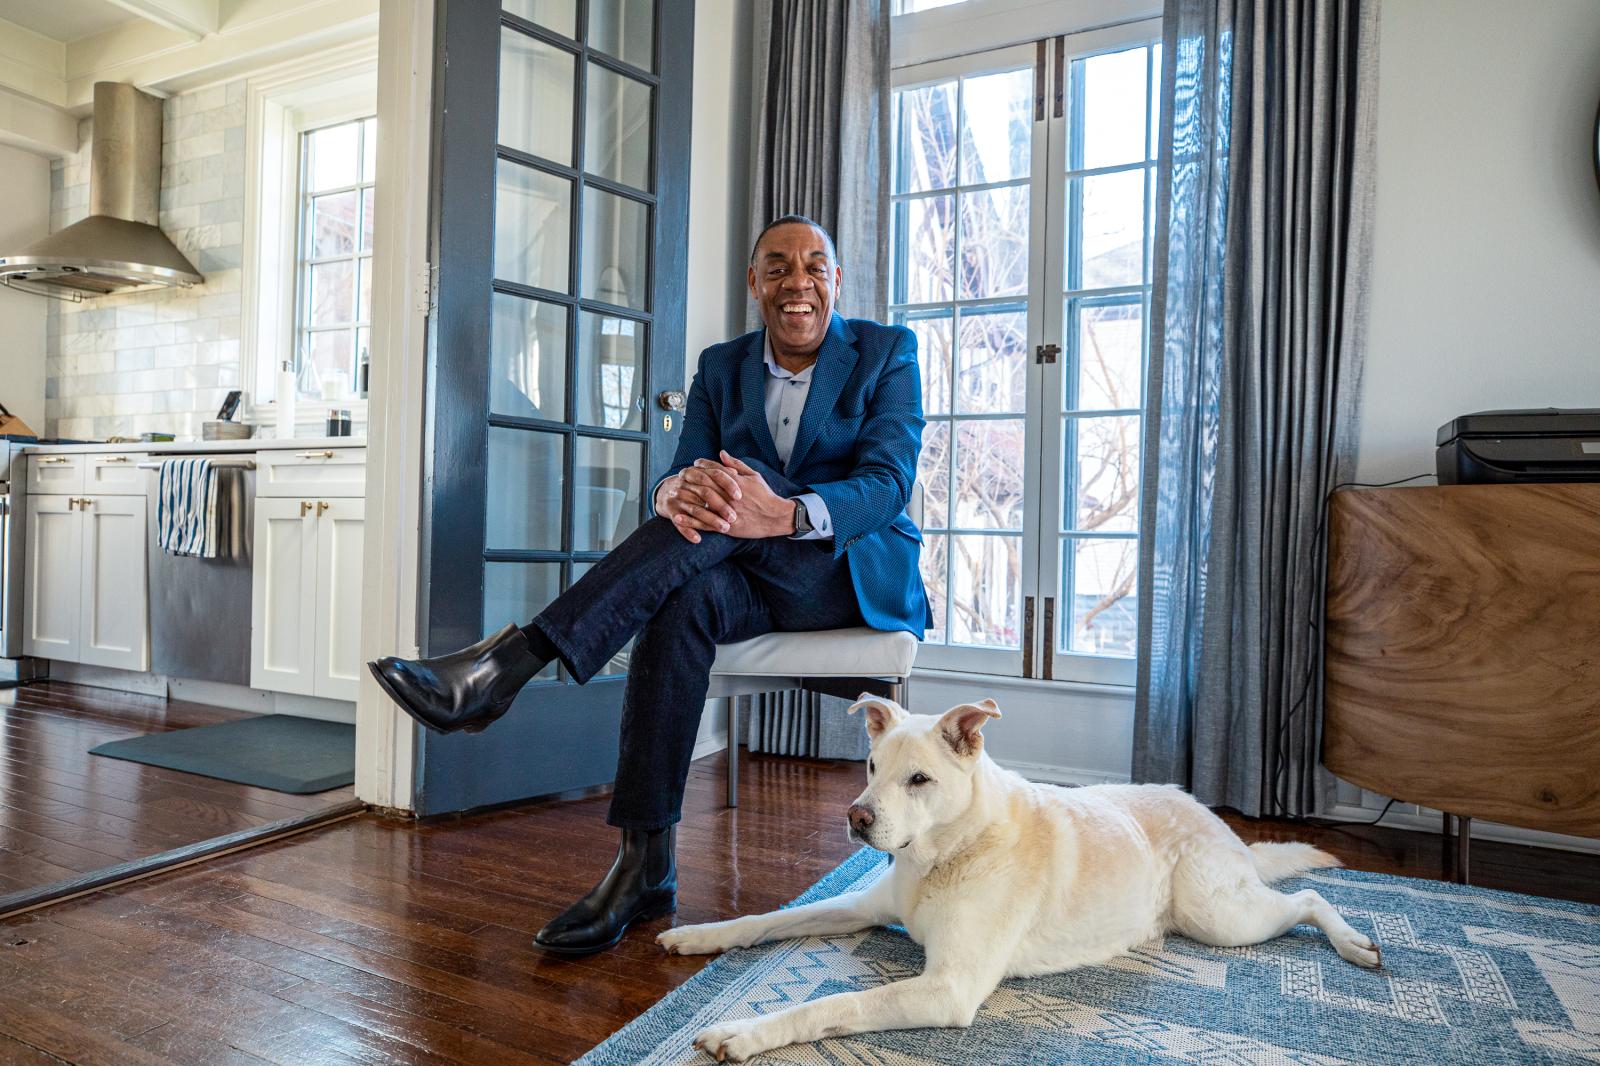 Washington, D.C. February 10th 2022. Patroski Lawson, CEO of KPM Group DC, posing for a portrait at his residence in NW Washington D.C. 